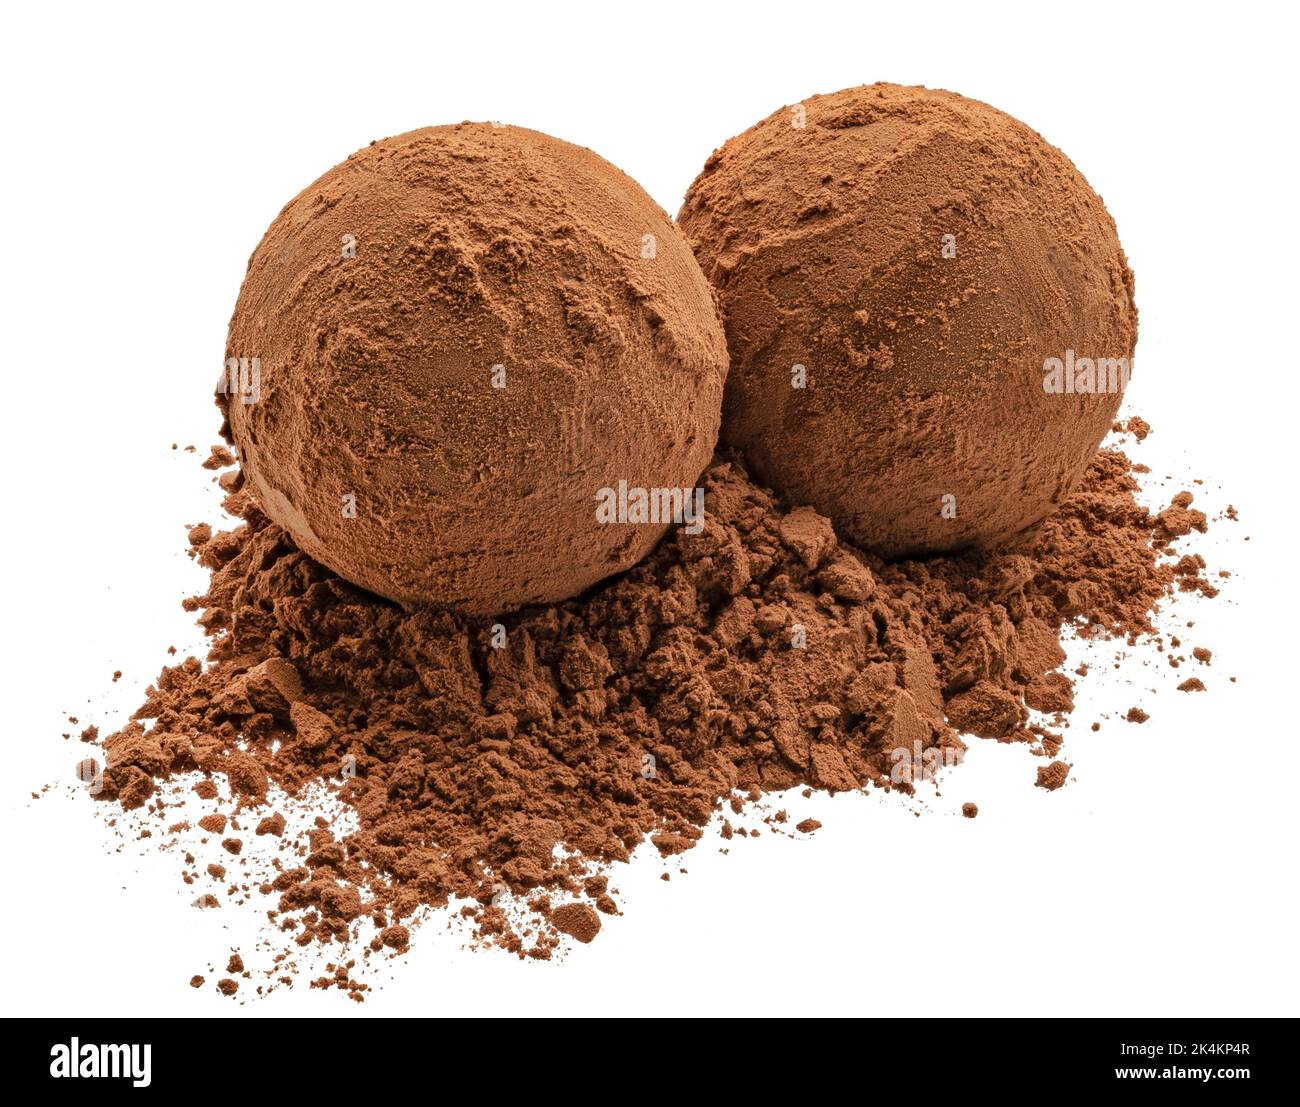 Chocolate truffles with cocoa powder isolated on white background Stock Photo